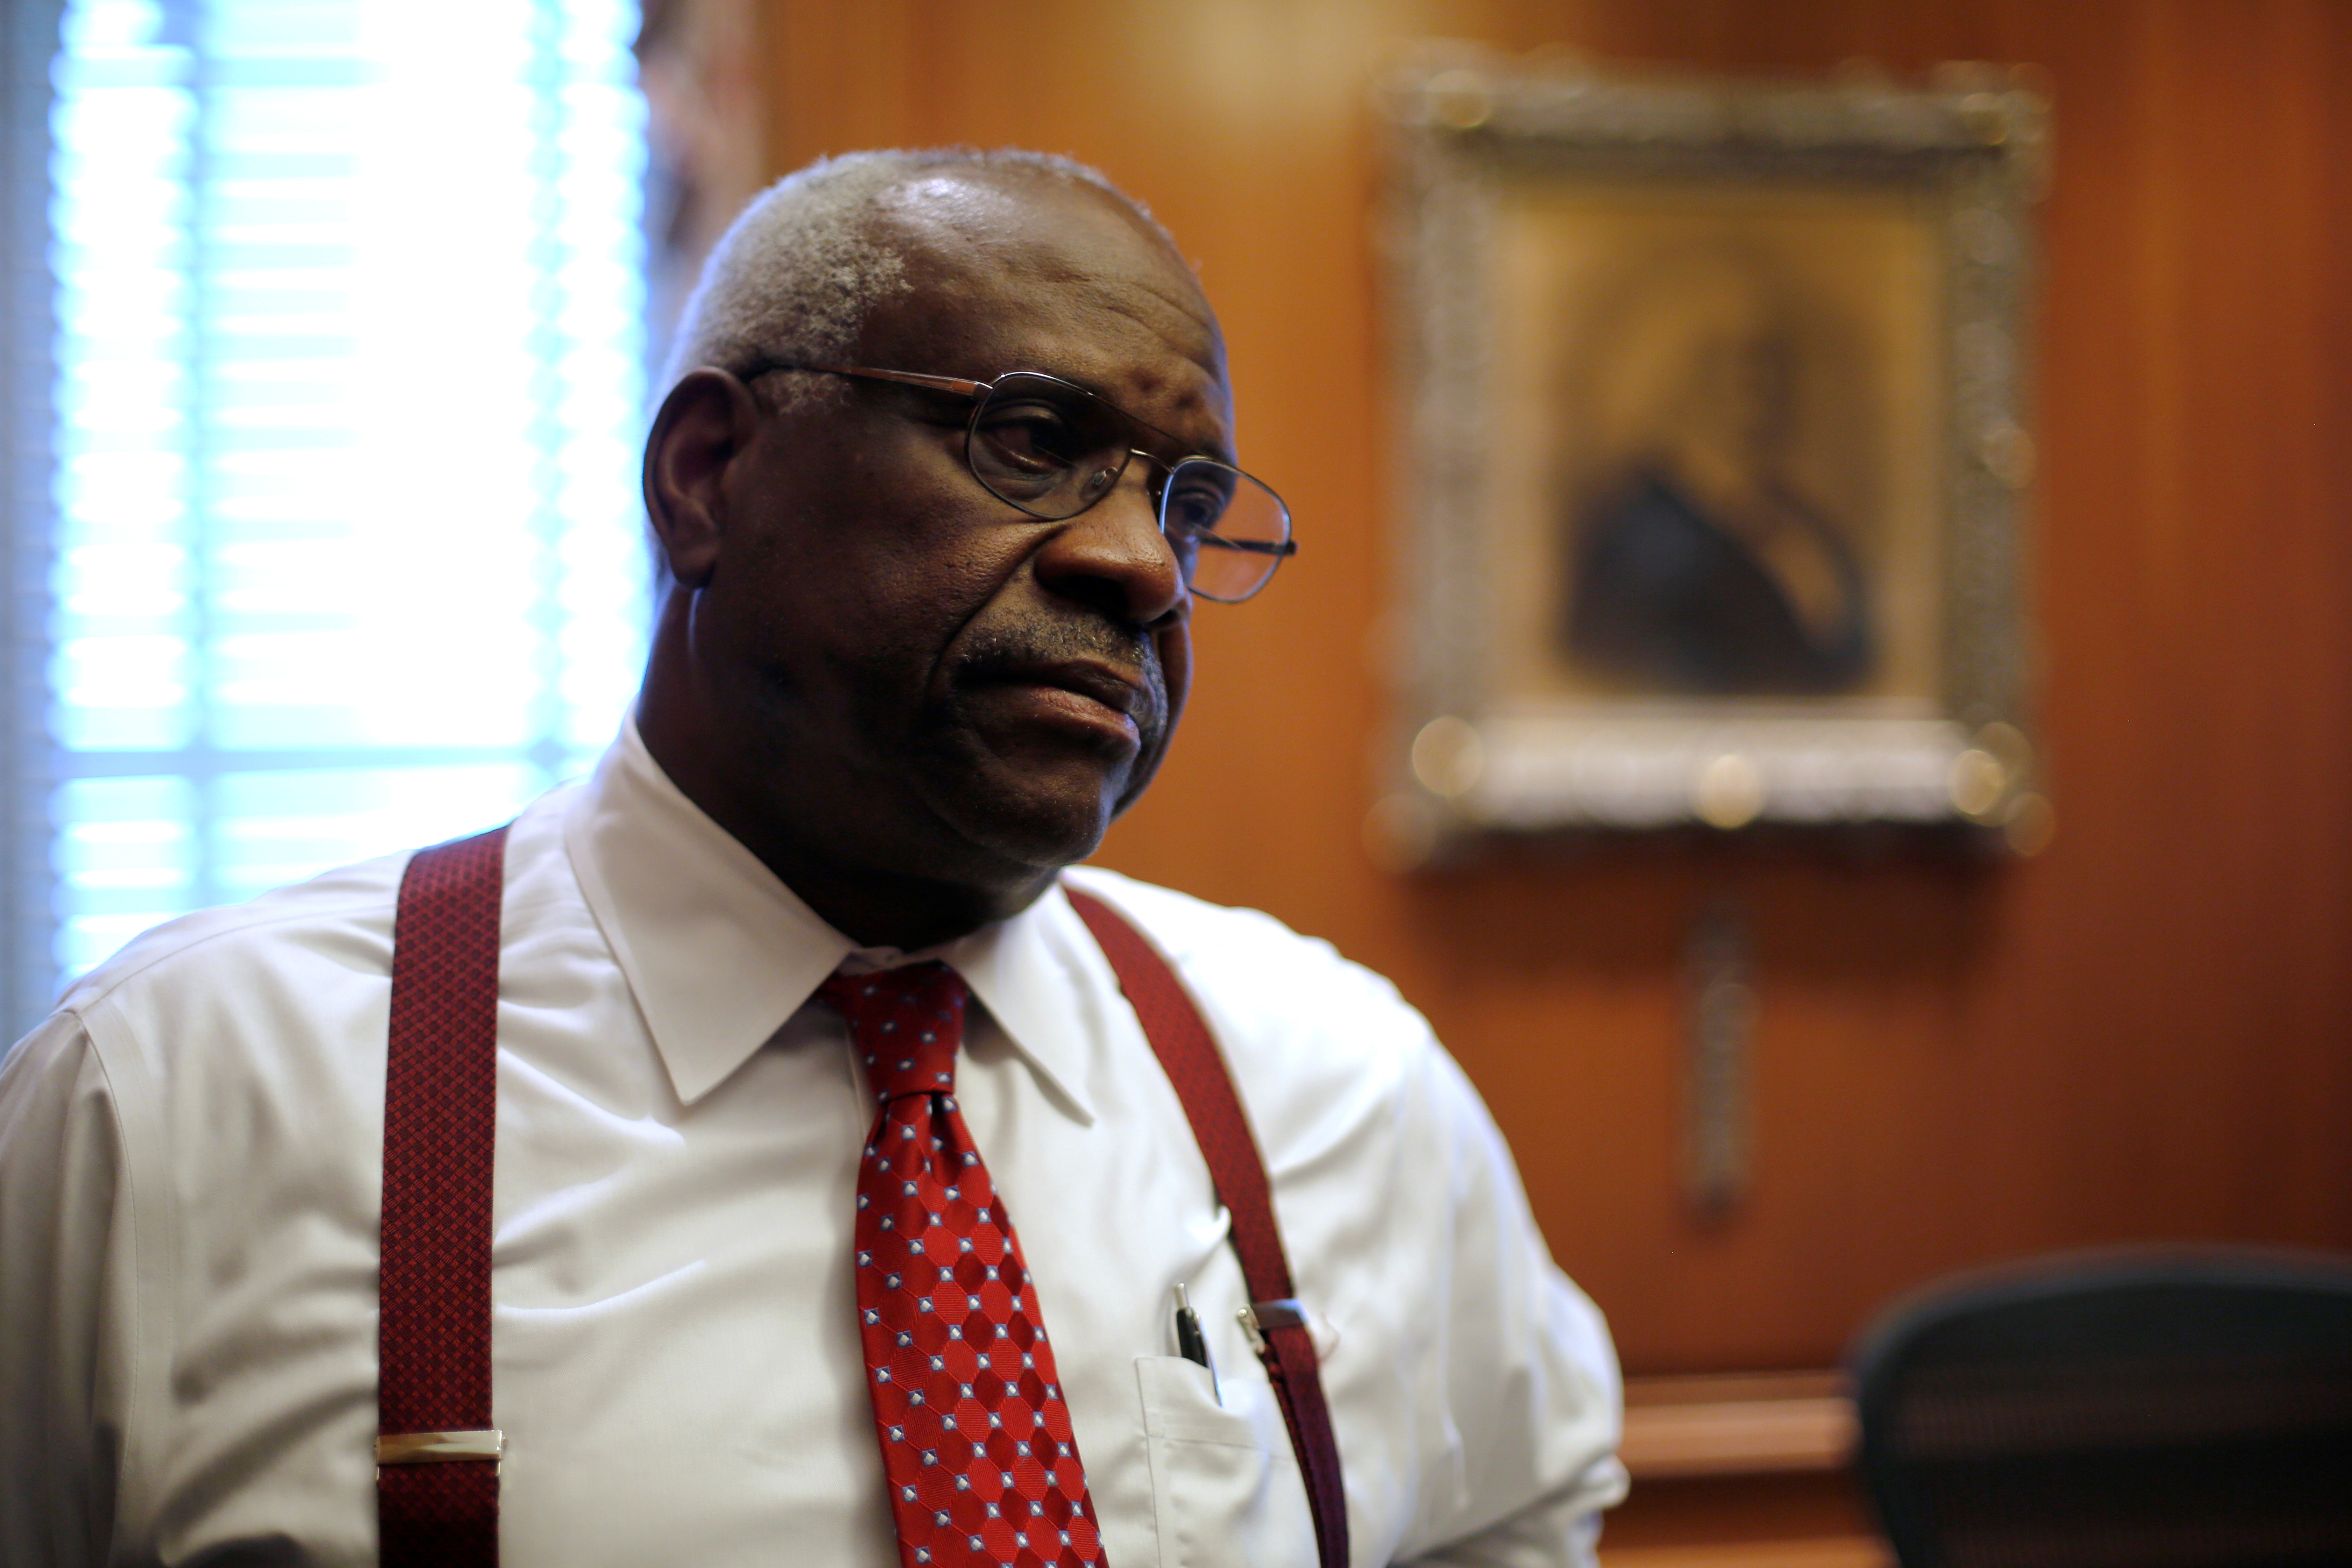 U.S. Supreme Court Justice Thomas is seen in his chambers at the U.S. Supreme Court building in Washington